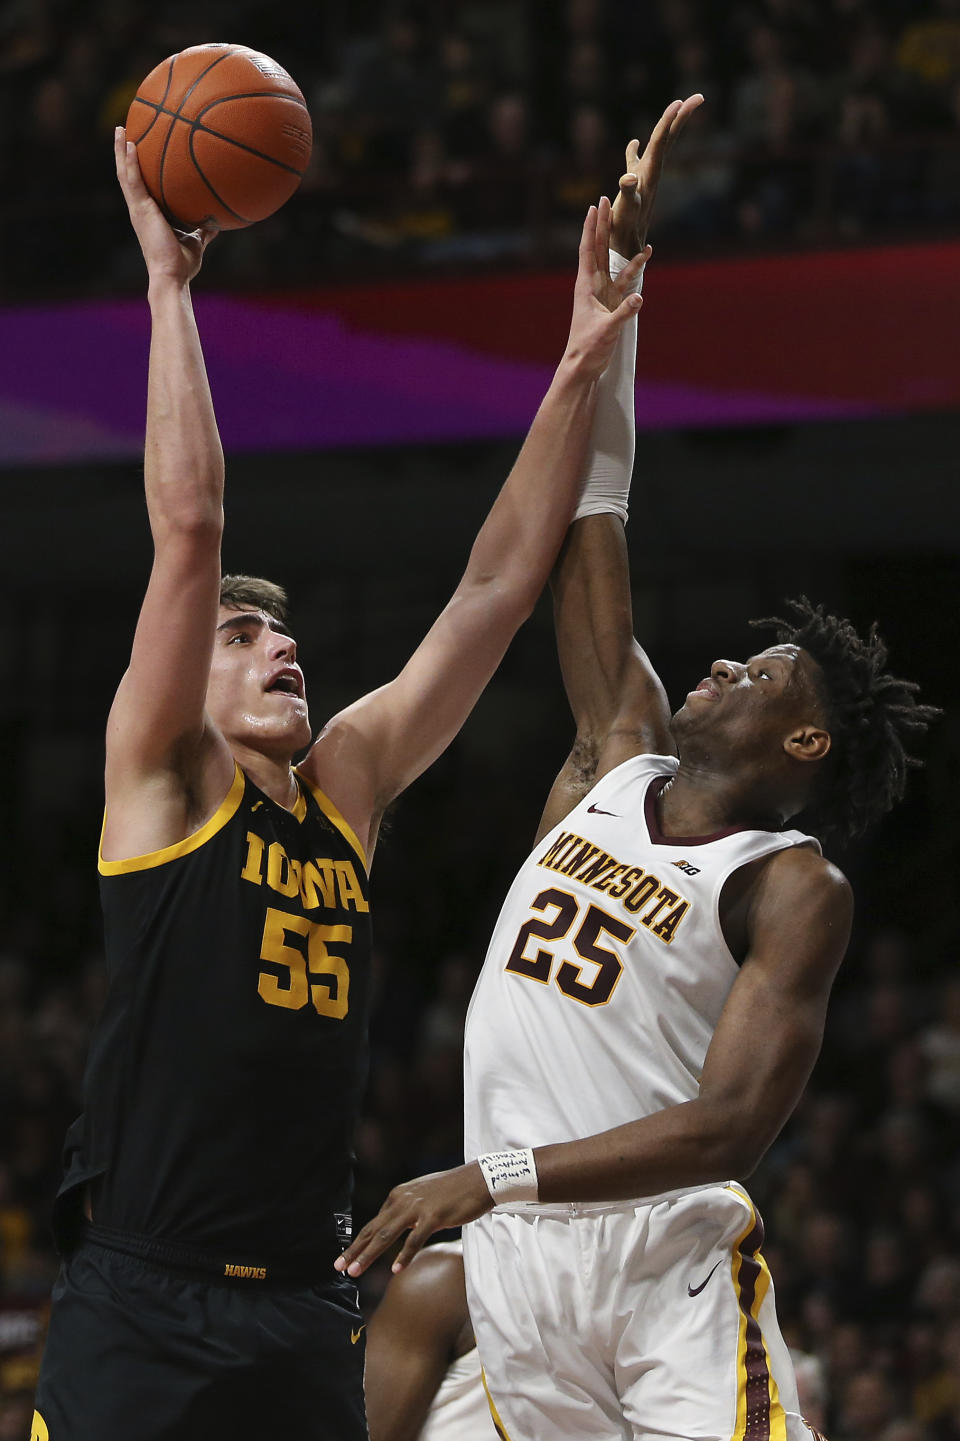 Iowa's Luka Garza, left, shoots against Minnesota's Daniel Oturu during the second half of an NCAA college basketball game Sunday, Feb. 16, 2020, in Minneapolis. (AP Photo/Stacy Bengs)